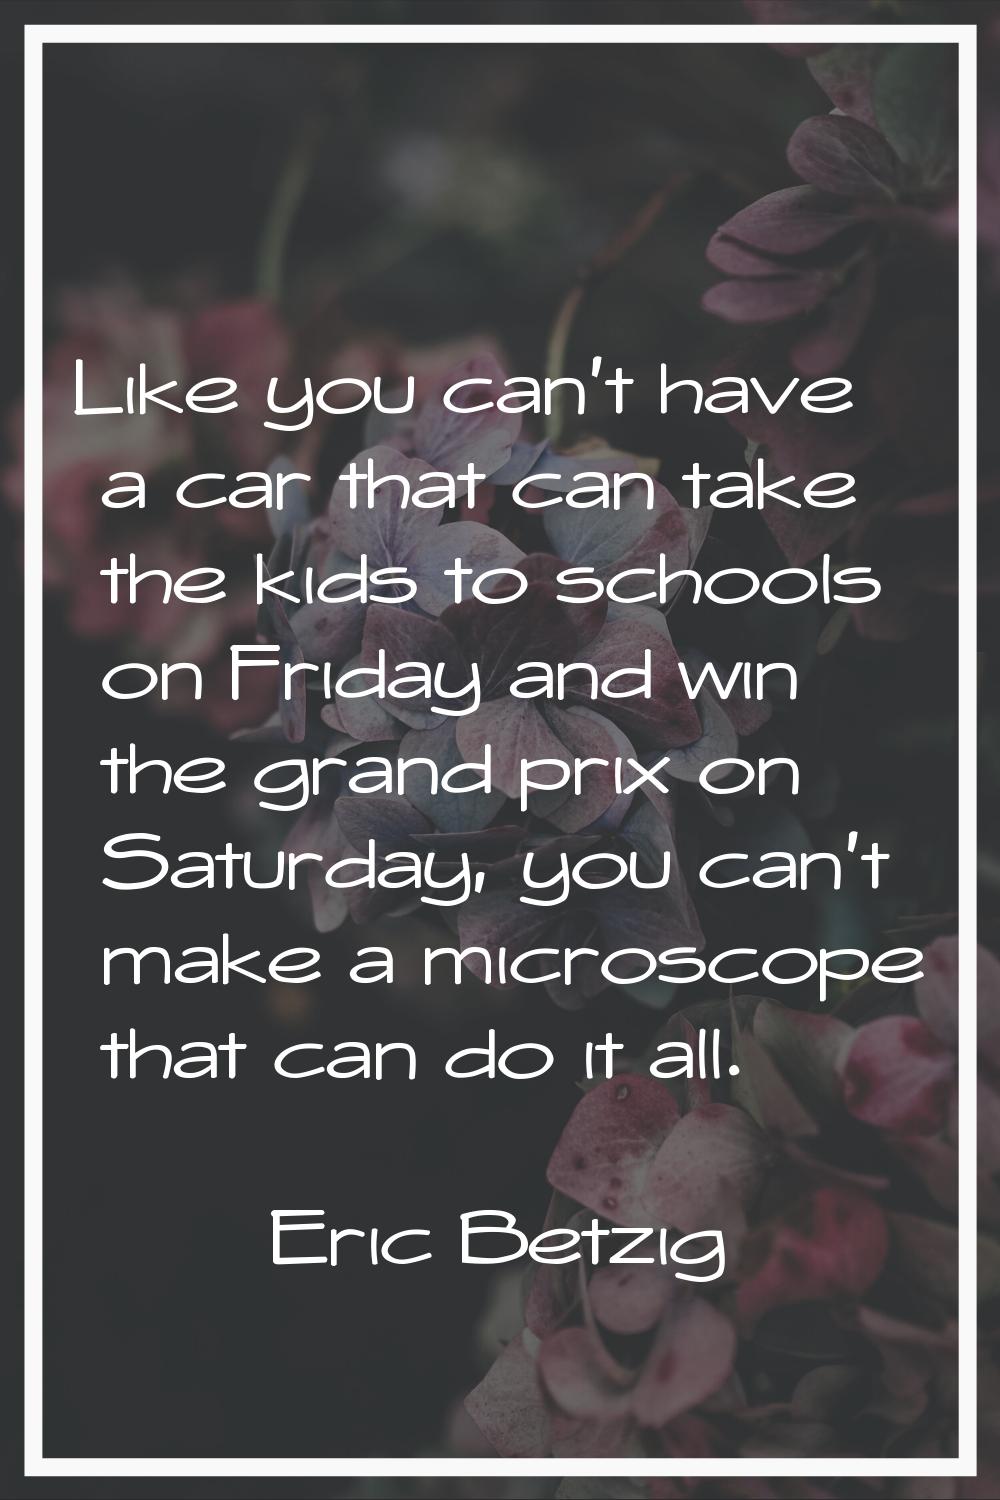 Like you can't have a car that can take the kids to schools on Friday and win the grand prix on Sat